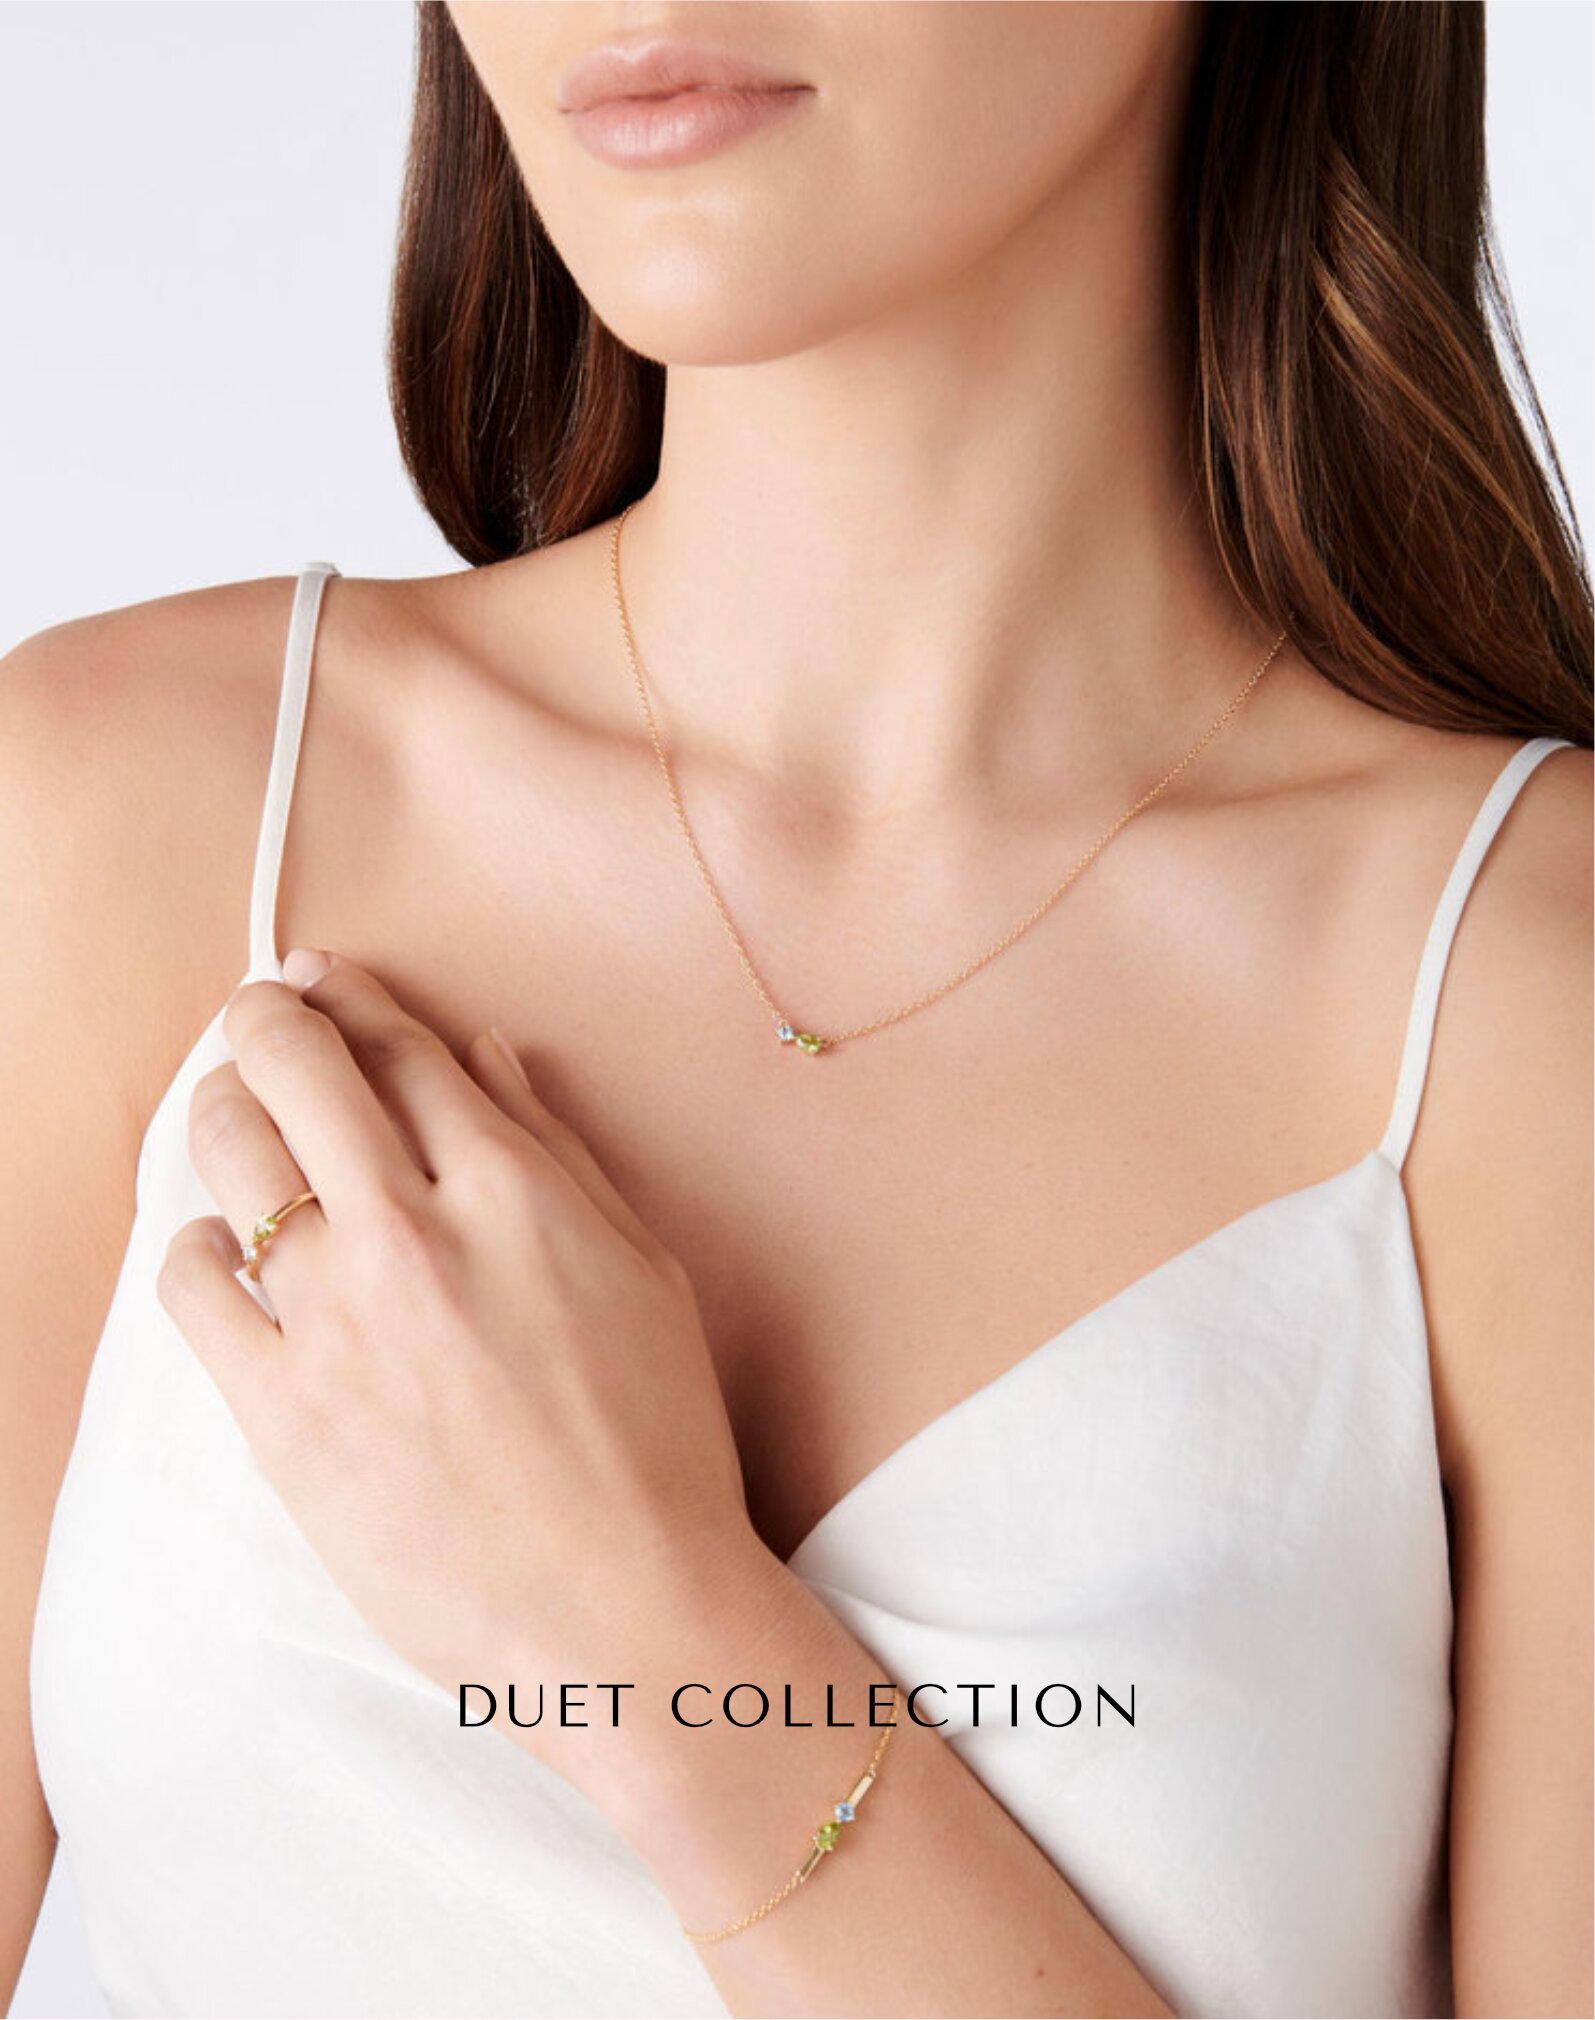 DUET COLLECTION